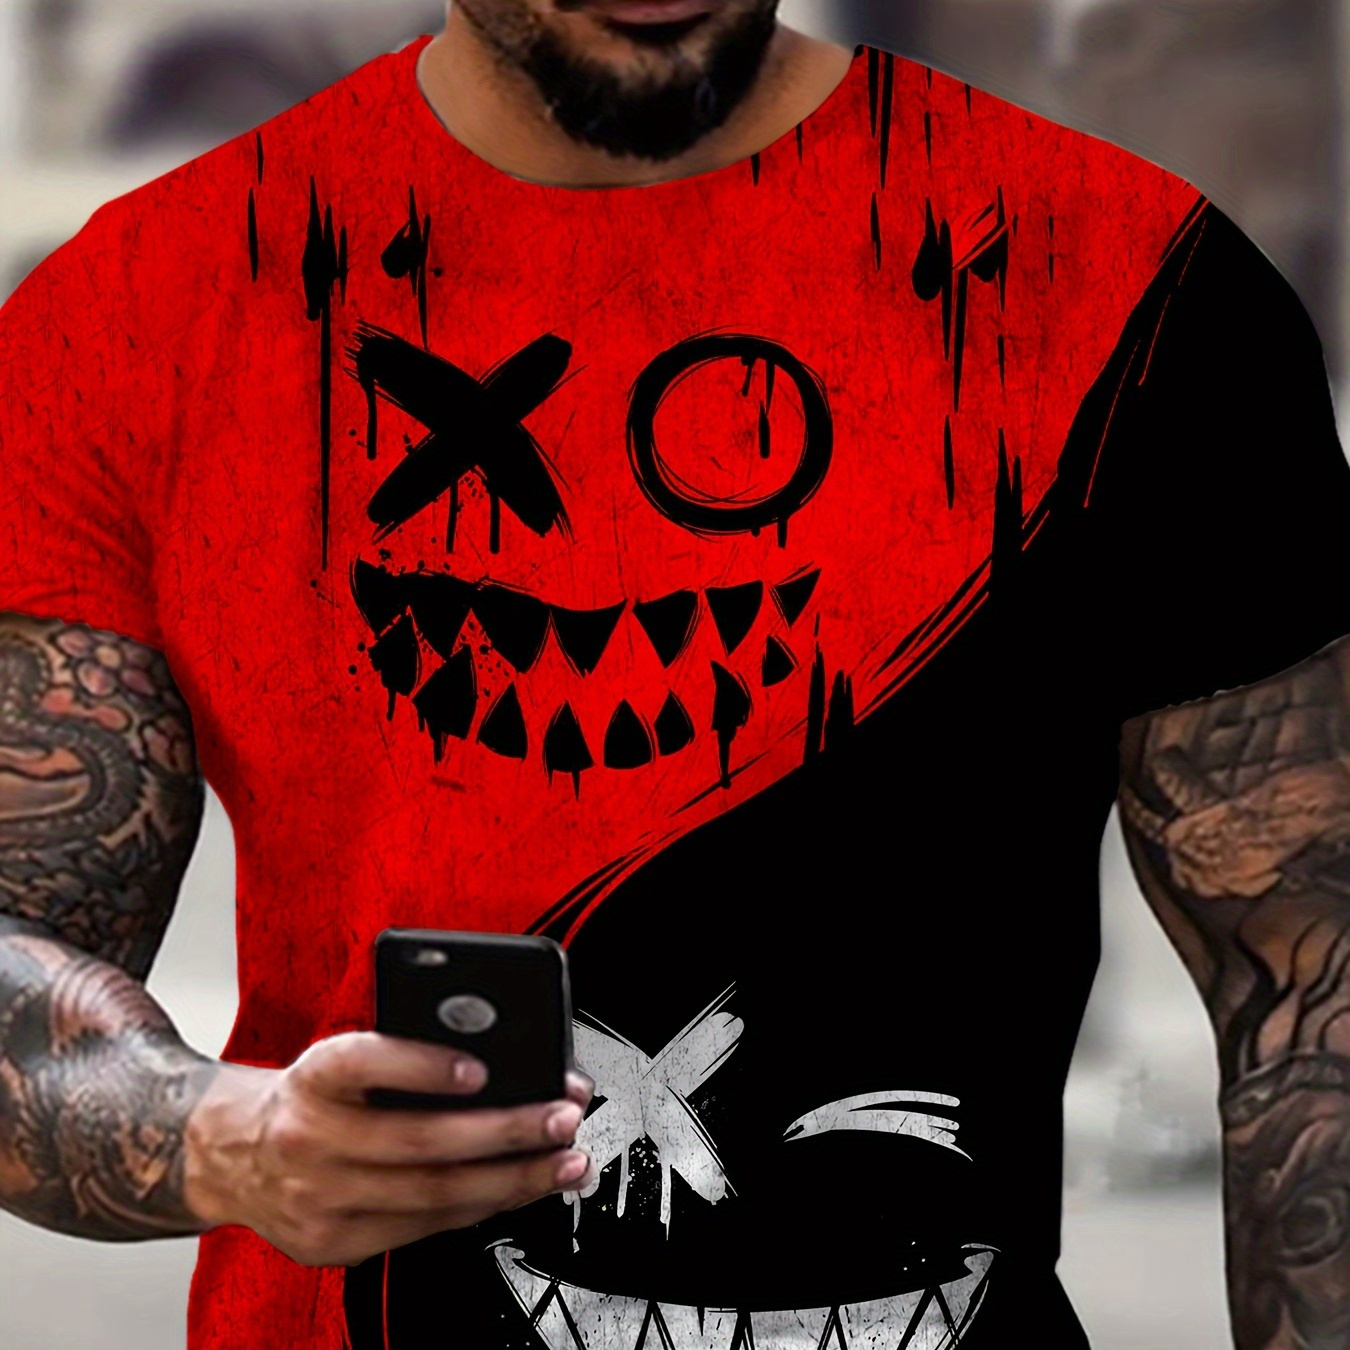 Men's Contrast Color Evil Smiling Face Pattern Print Crew Neck And Short Sleeve T-shirt, Novel And Stylish Tops Suitable For Summer Outdoors Wear